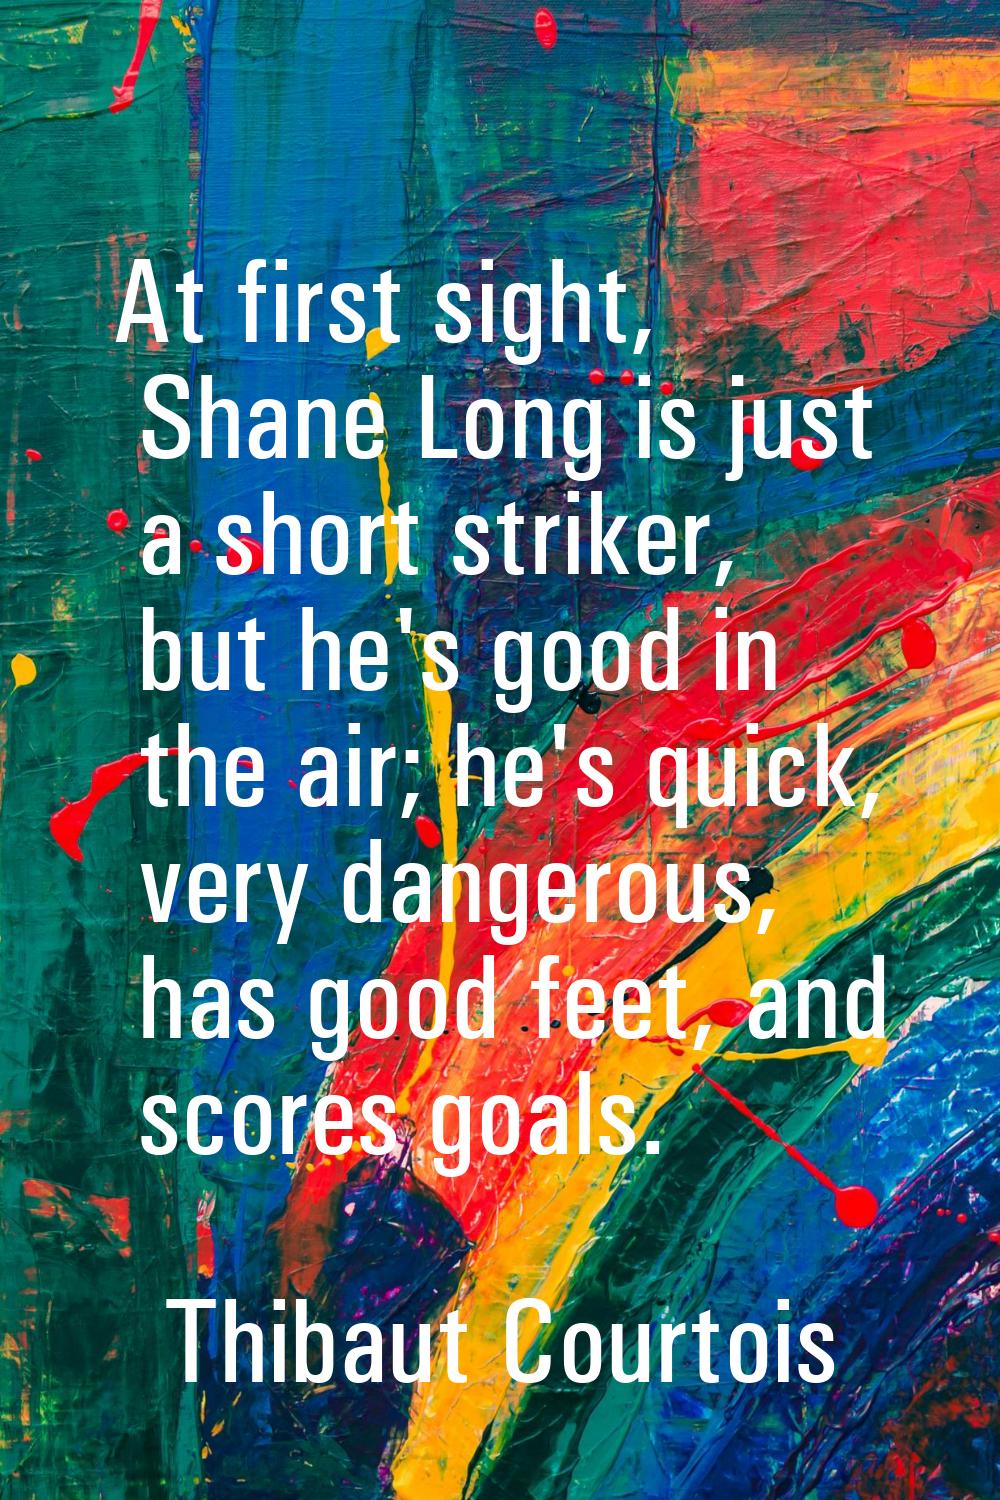 At first sight, Shane Long is just a short striker, but he's good in the air; he's quick, very dang